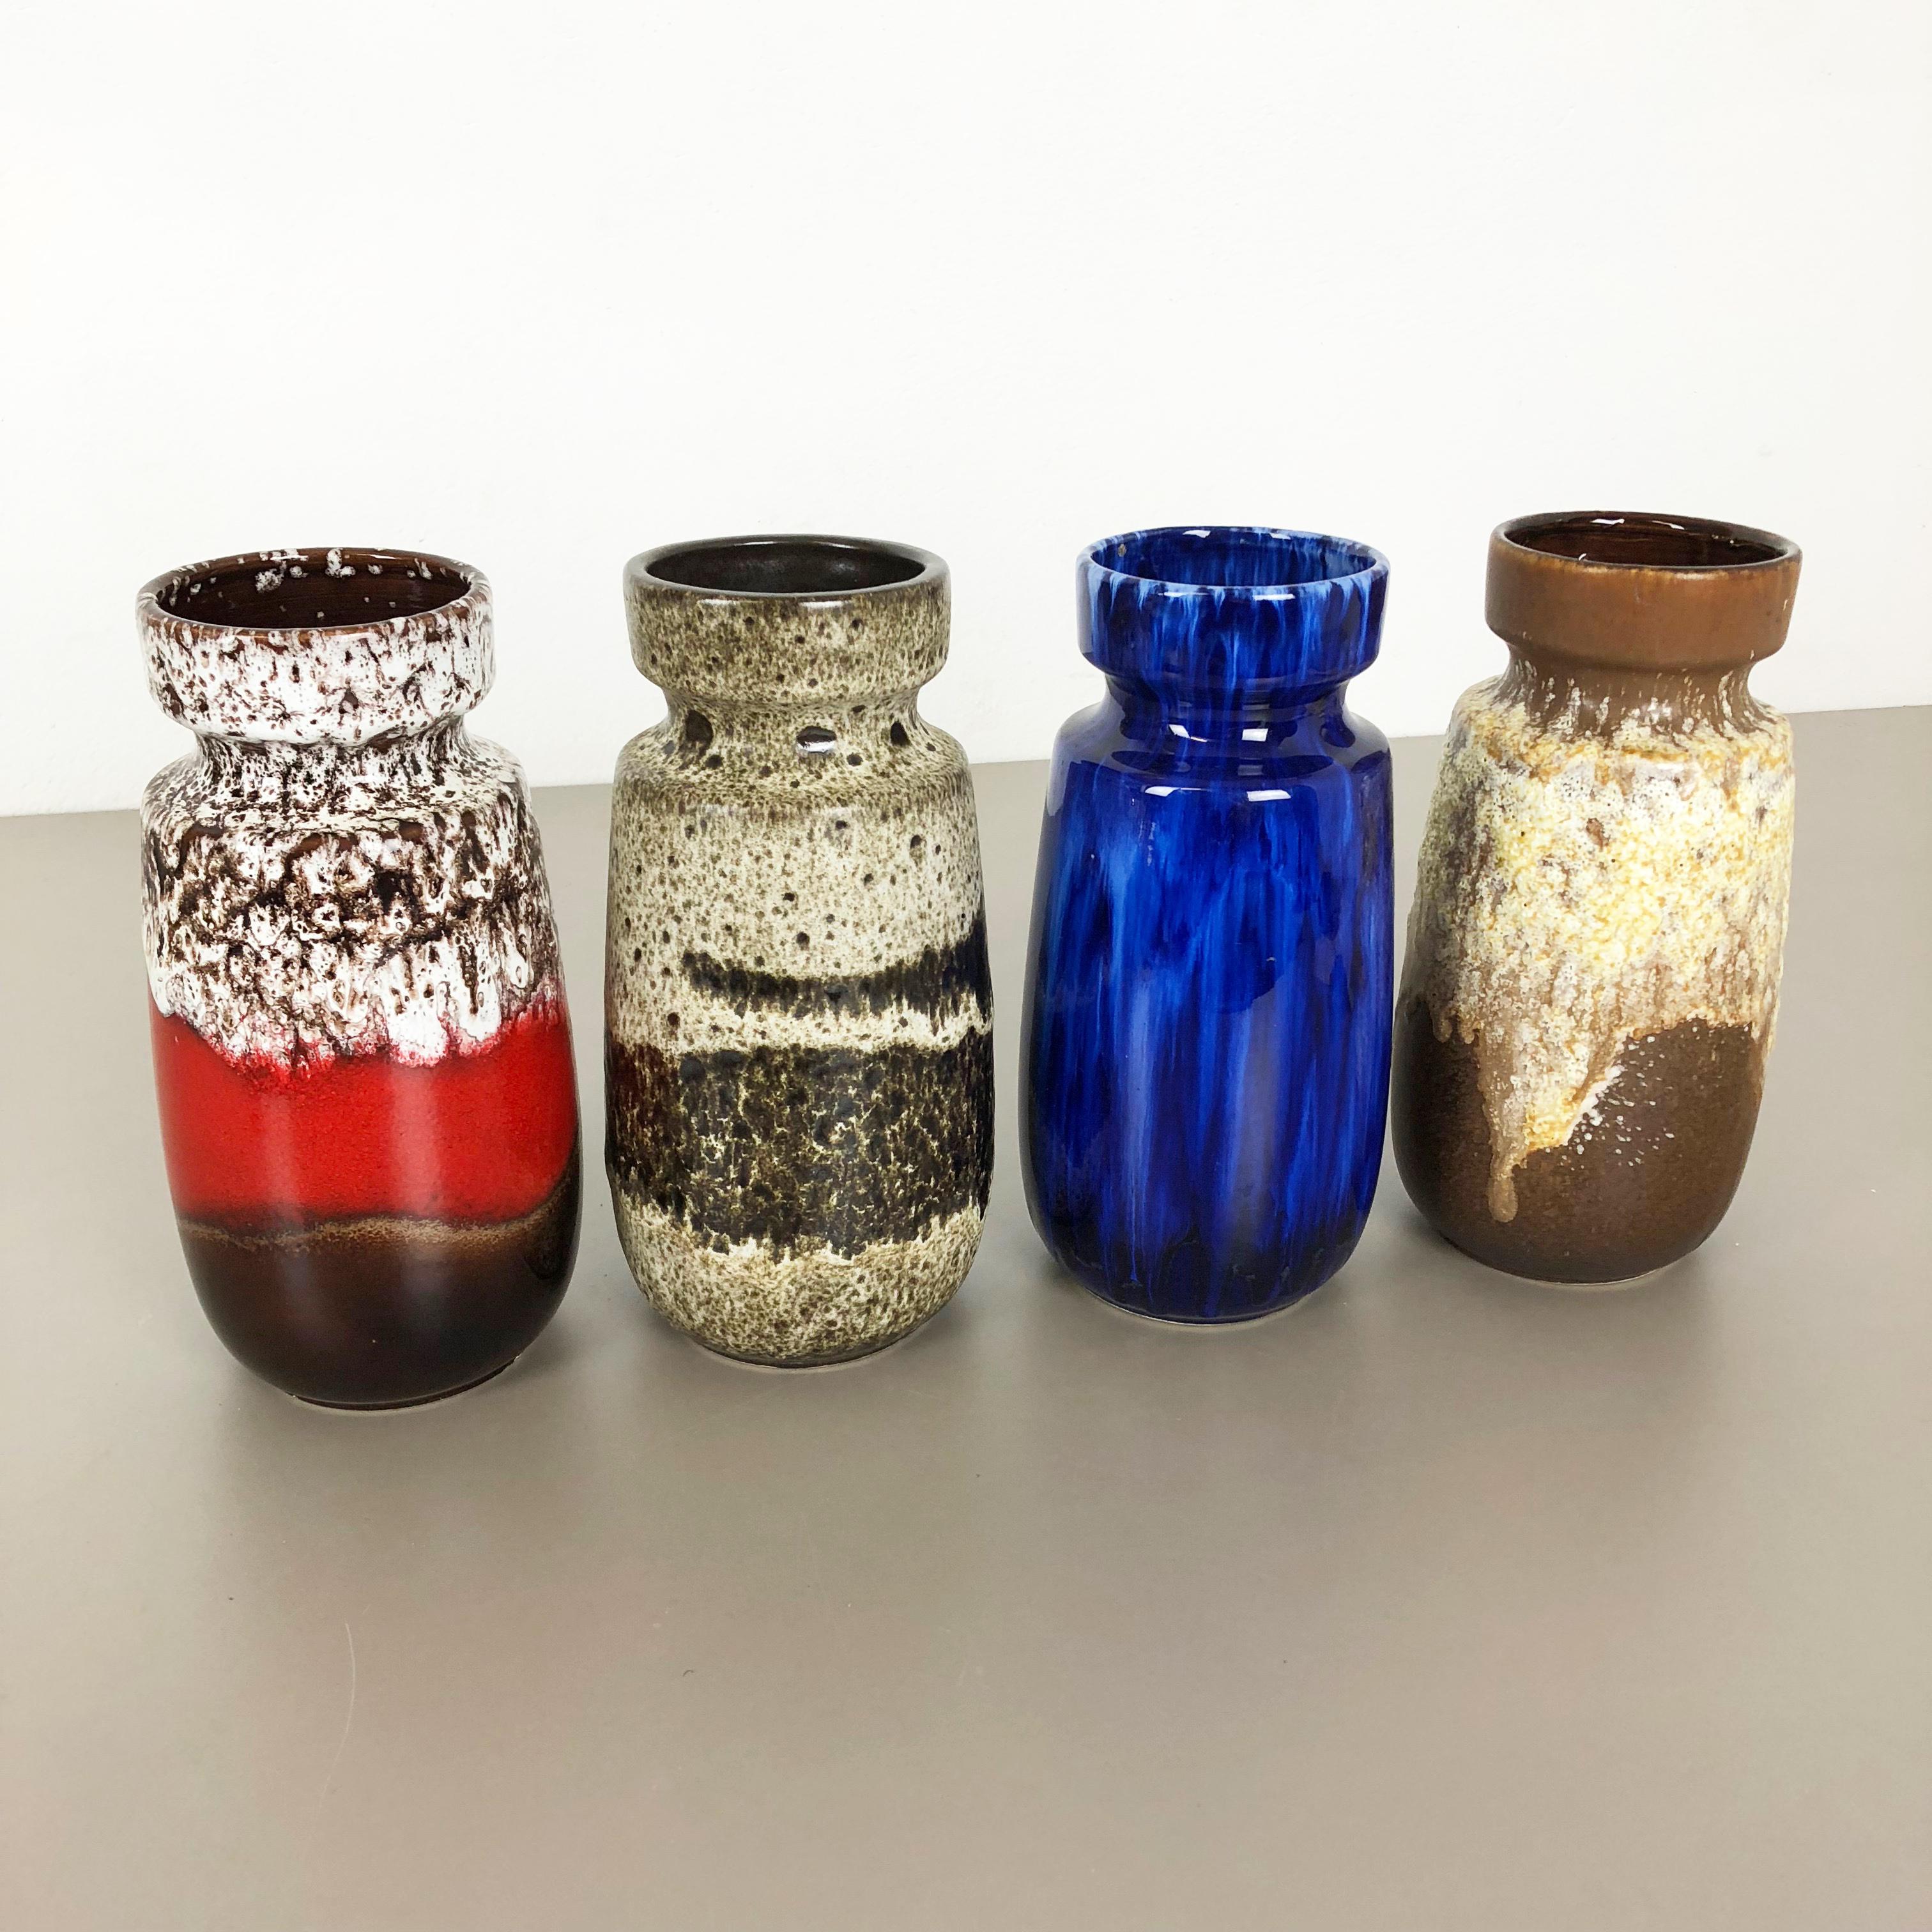 Article:

Set of four fat lava art vases

Producer:

Scheurich, Germany

Decade:

1970s

These original vintage vases was produced in the 1970s in Germany. It is made of ceramic pottery in fat lava optic. Super rare in this coloration.